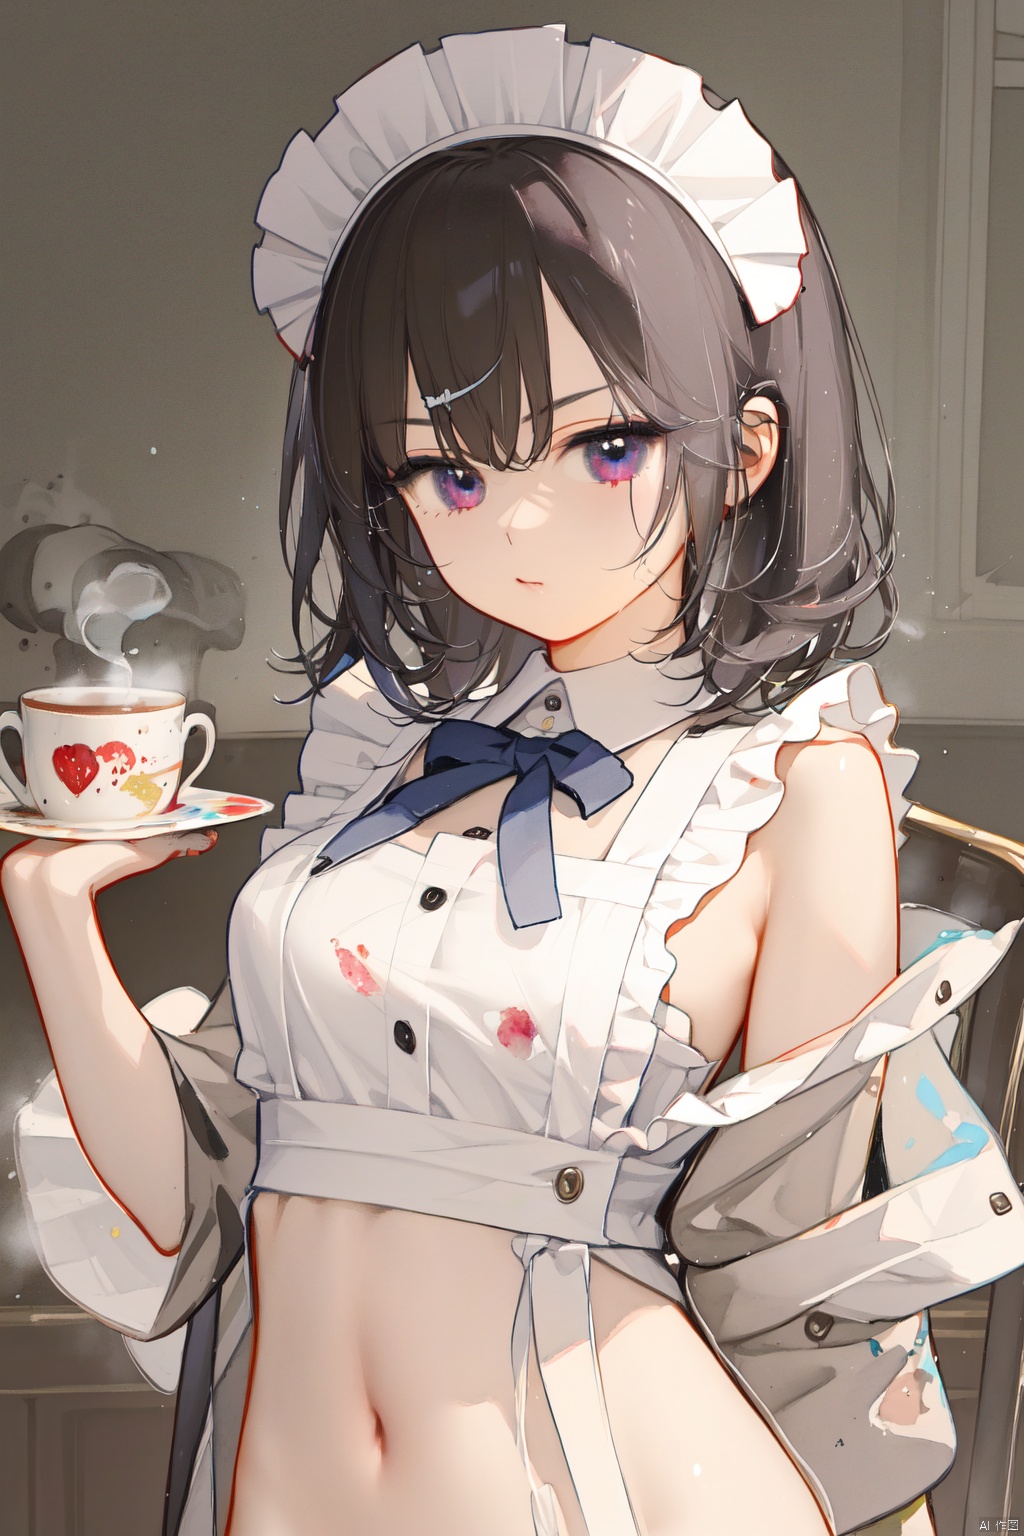 (((Maid Cafe Art))), ((Watercolor painting)), Maid cafe, ((Best quality)), Low angle view, ((Illustration)), (1 girl), Anime face, medium breast, holding a coffee tray, beautiful detailed maid cafe interior, looking at viewer, a detailed maid outfit naked withand white apron, very close to viewers, bare shoulders, lace headband, focus on face, short bob hair, upper body, lens flare, light leaks, detailed beautiful coffee cups and desserts, maid cafe, black hair, black and white clothes,  ((Steam)), rising steam flow, navel, (Beautiful detailed eyes)